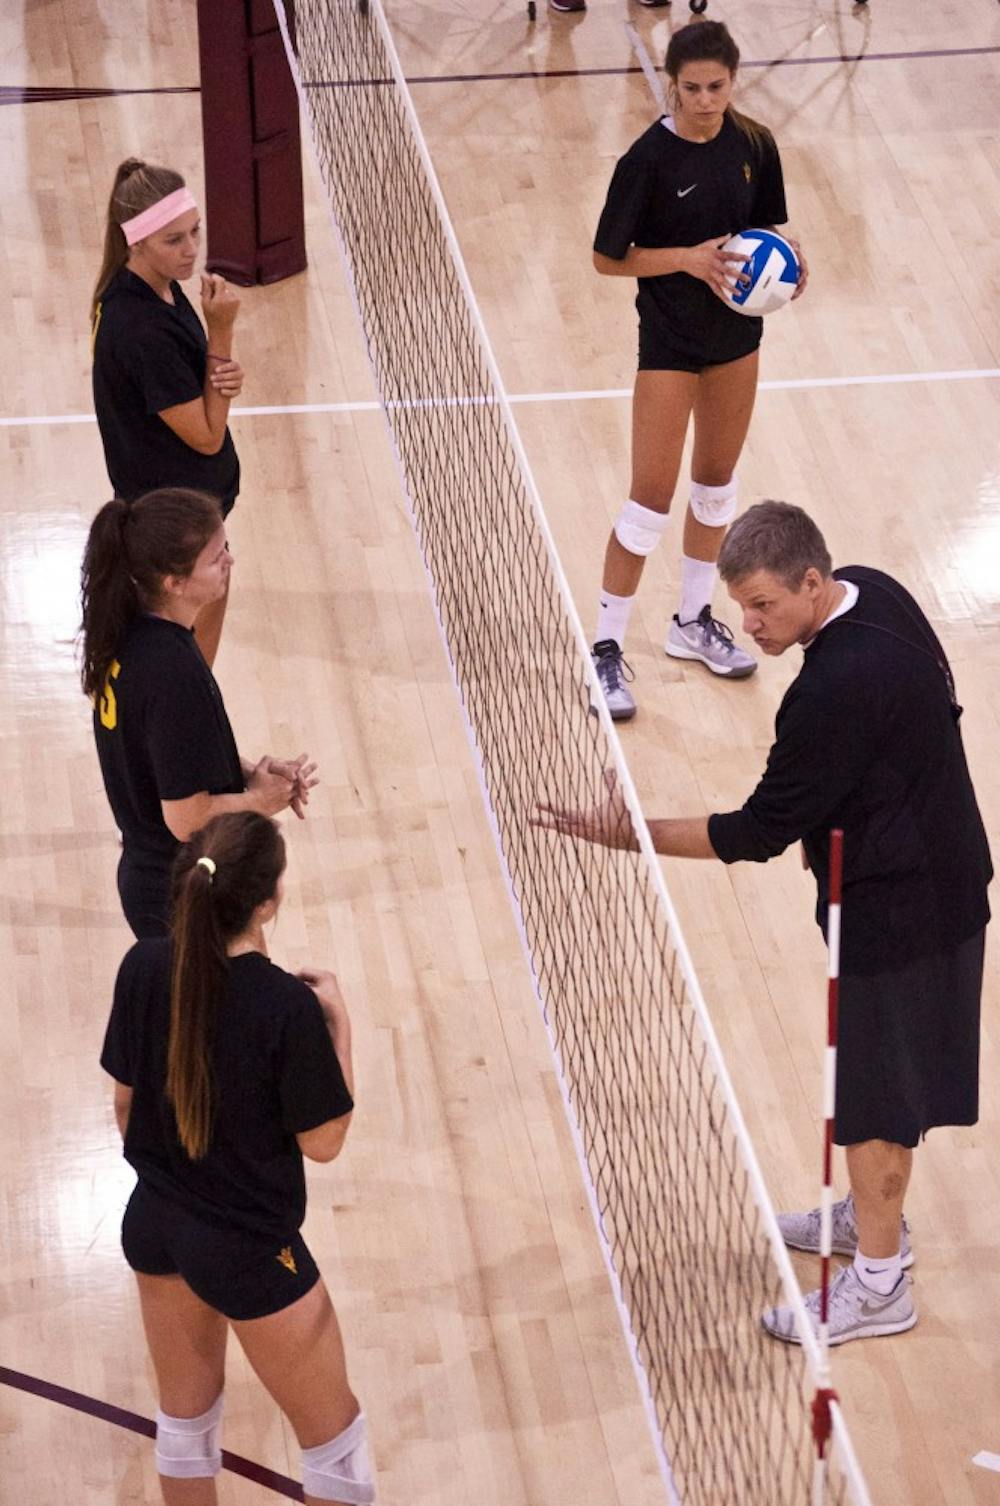 Jason Watson, the head coach of the ASU women’s volley ball team, gives his athletes blocking advice during a practice. The girls constantly rotate players on and off the court so they all go through the same practice drills. (Photo by Katie Dunphy)